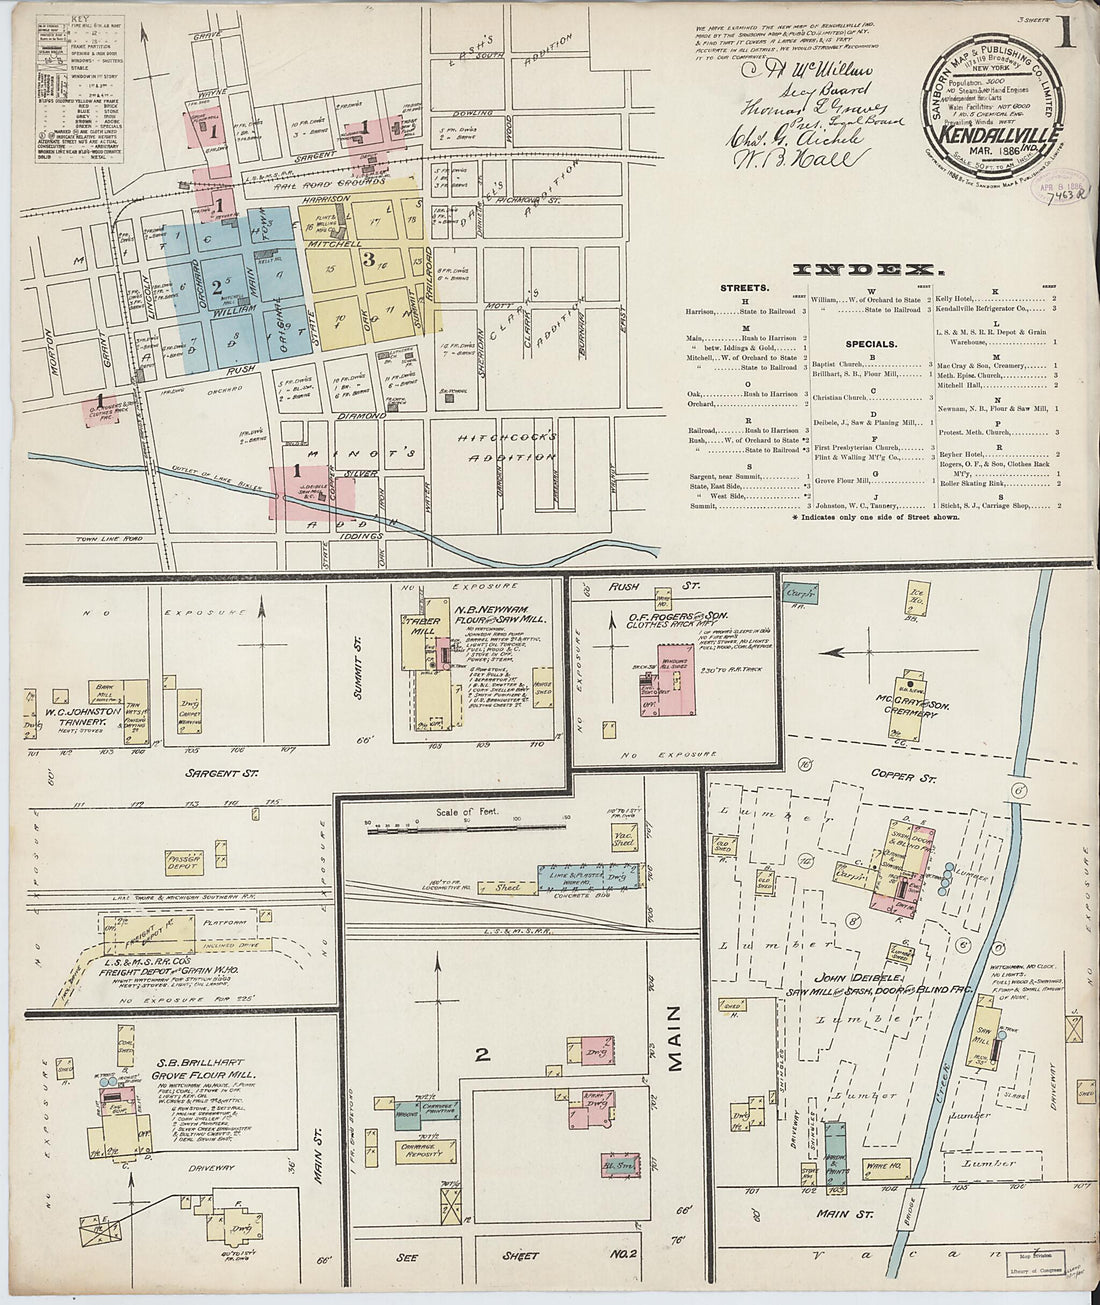 This old map of Kendallville, Noble County, Indiana was created by Sanborn Map Company in 1886